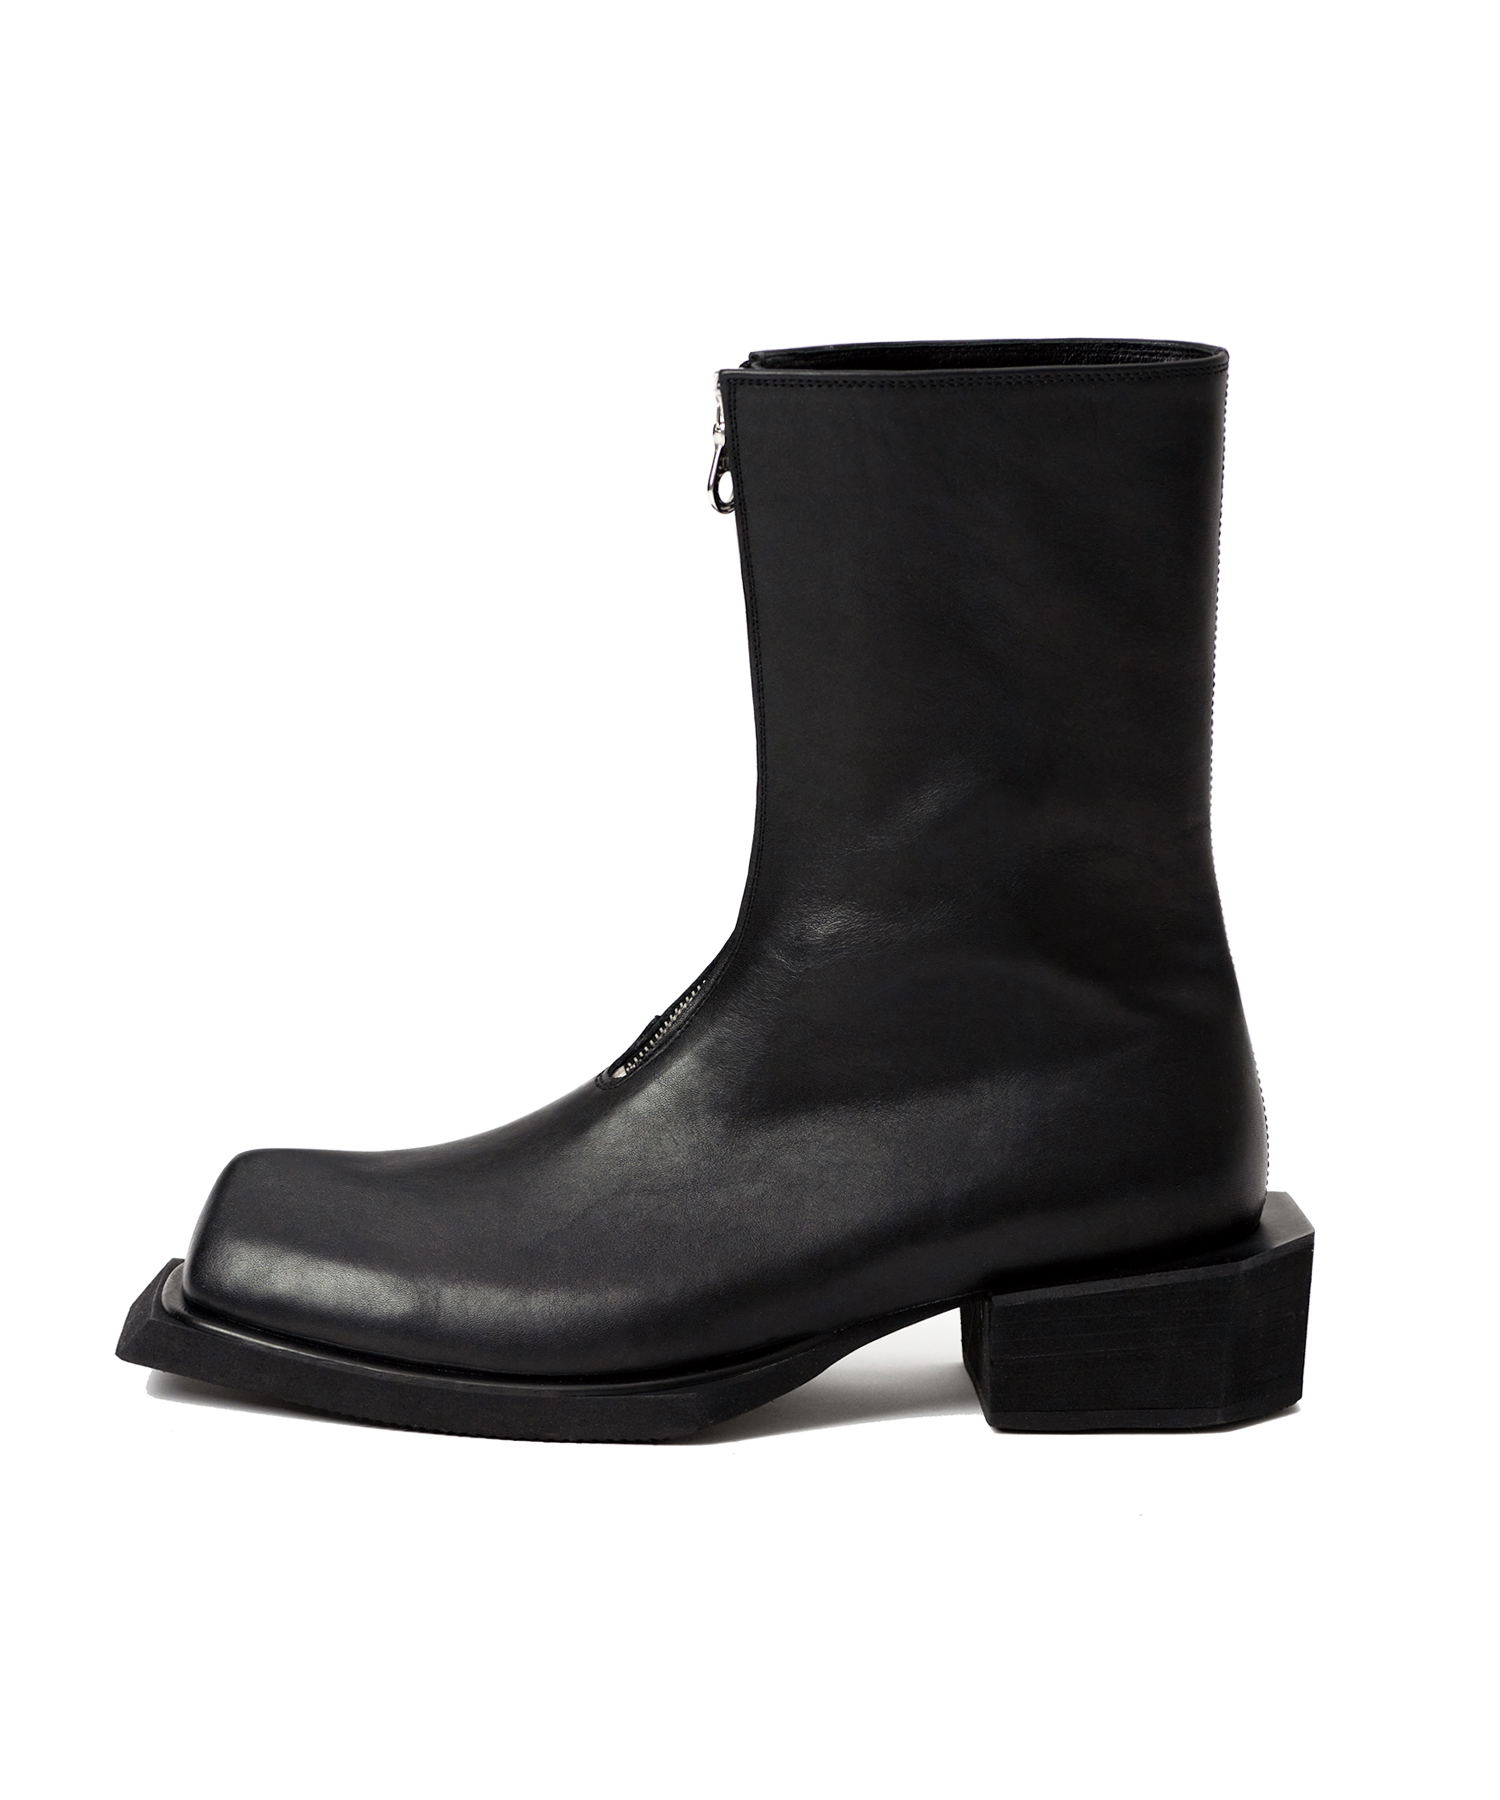 LMMM TRIANGLE FRONT ZIP BOOTS BLACK